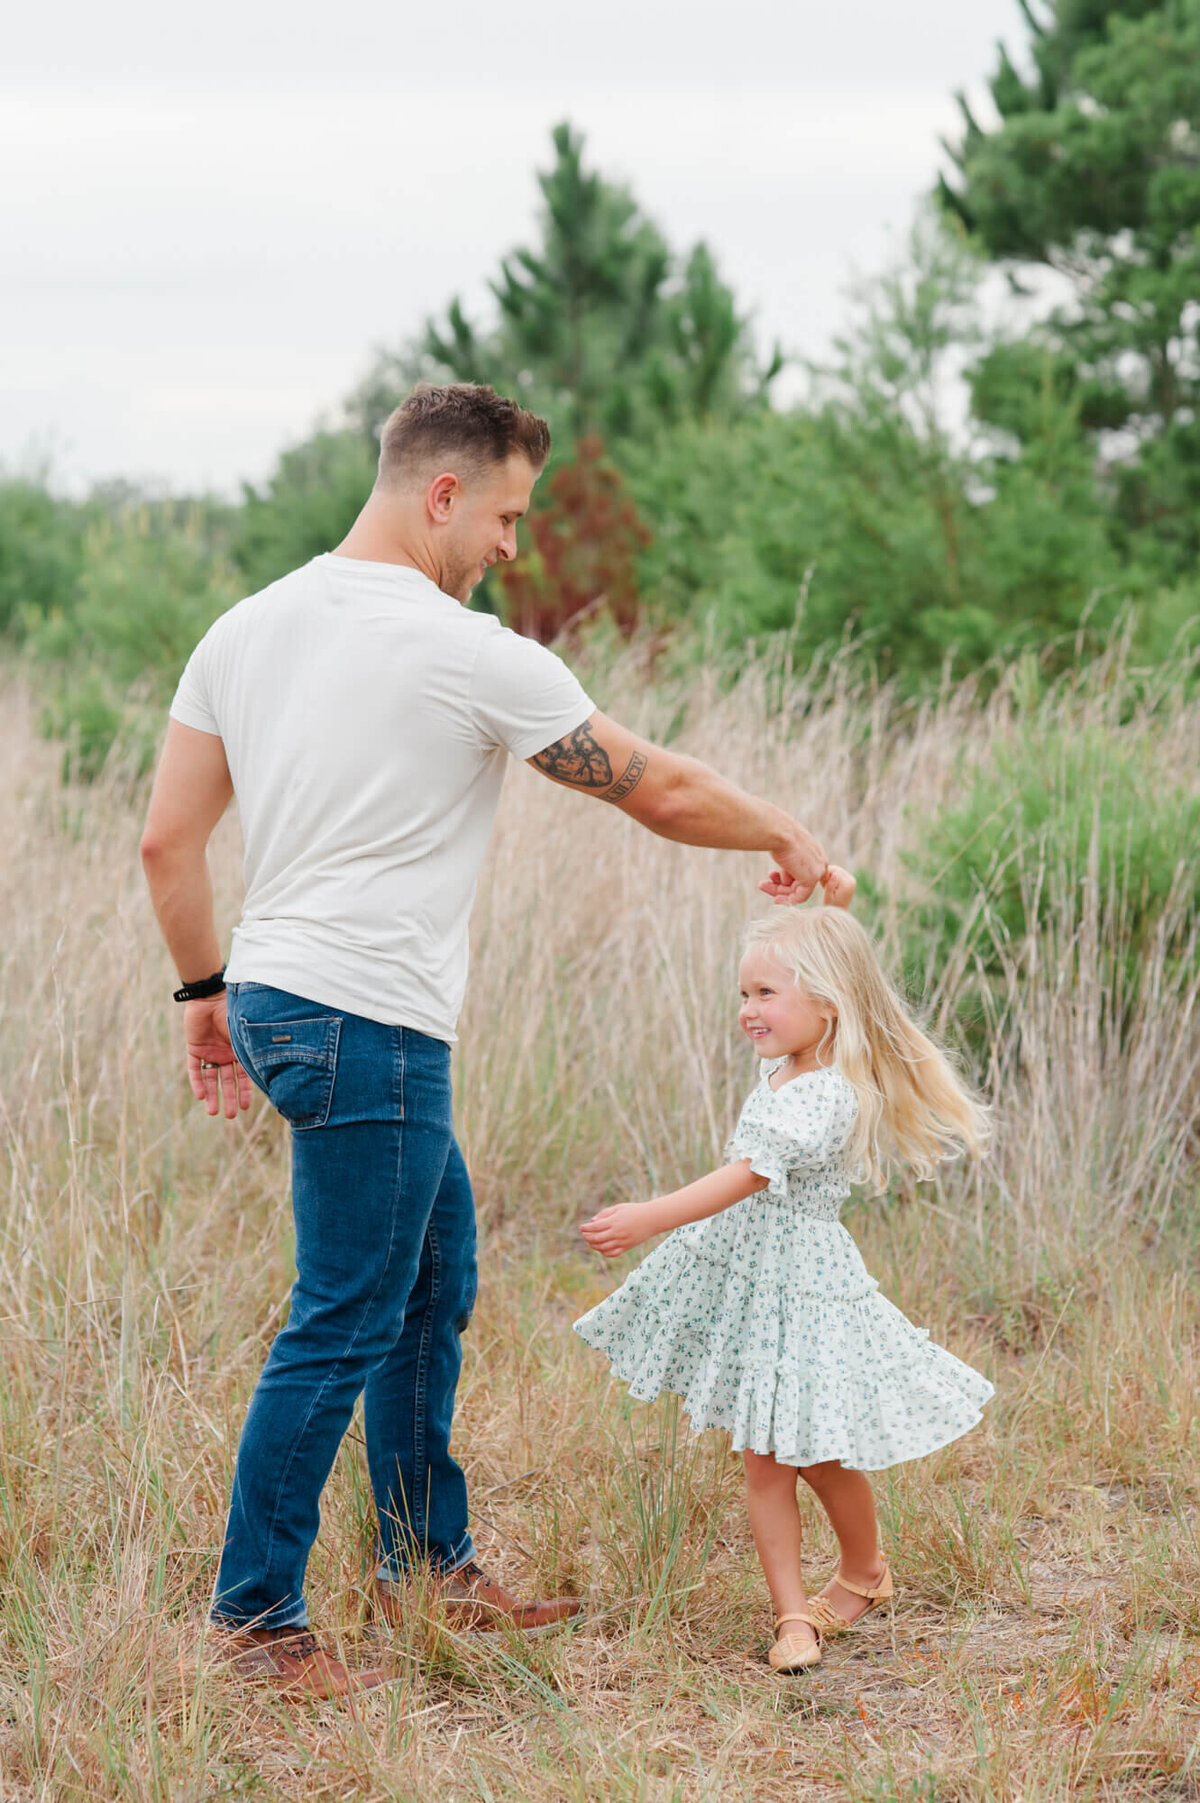 Dad spinning his young daughter while dancing with her in a tall grass field